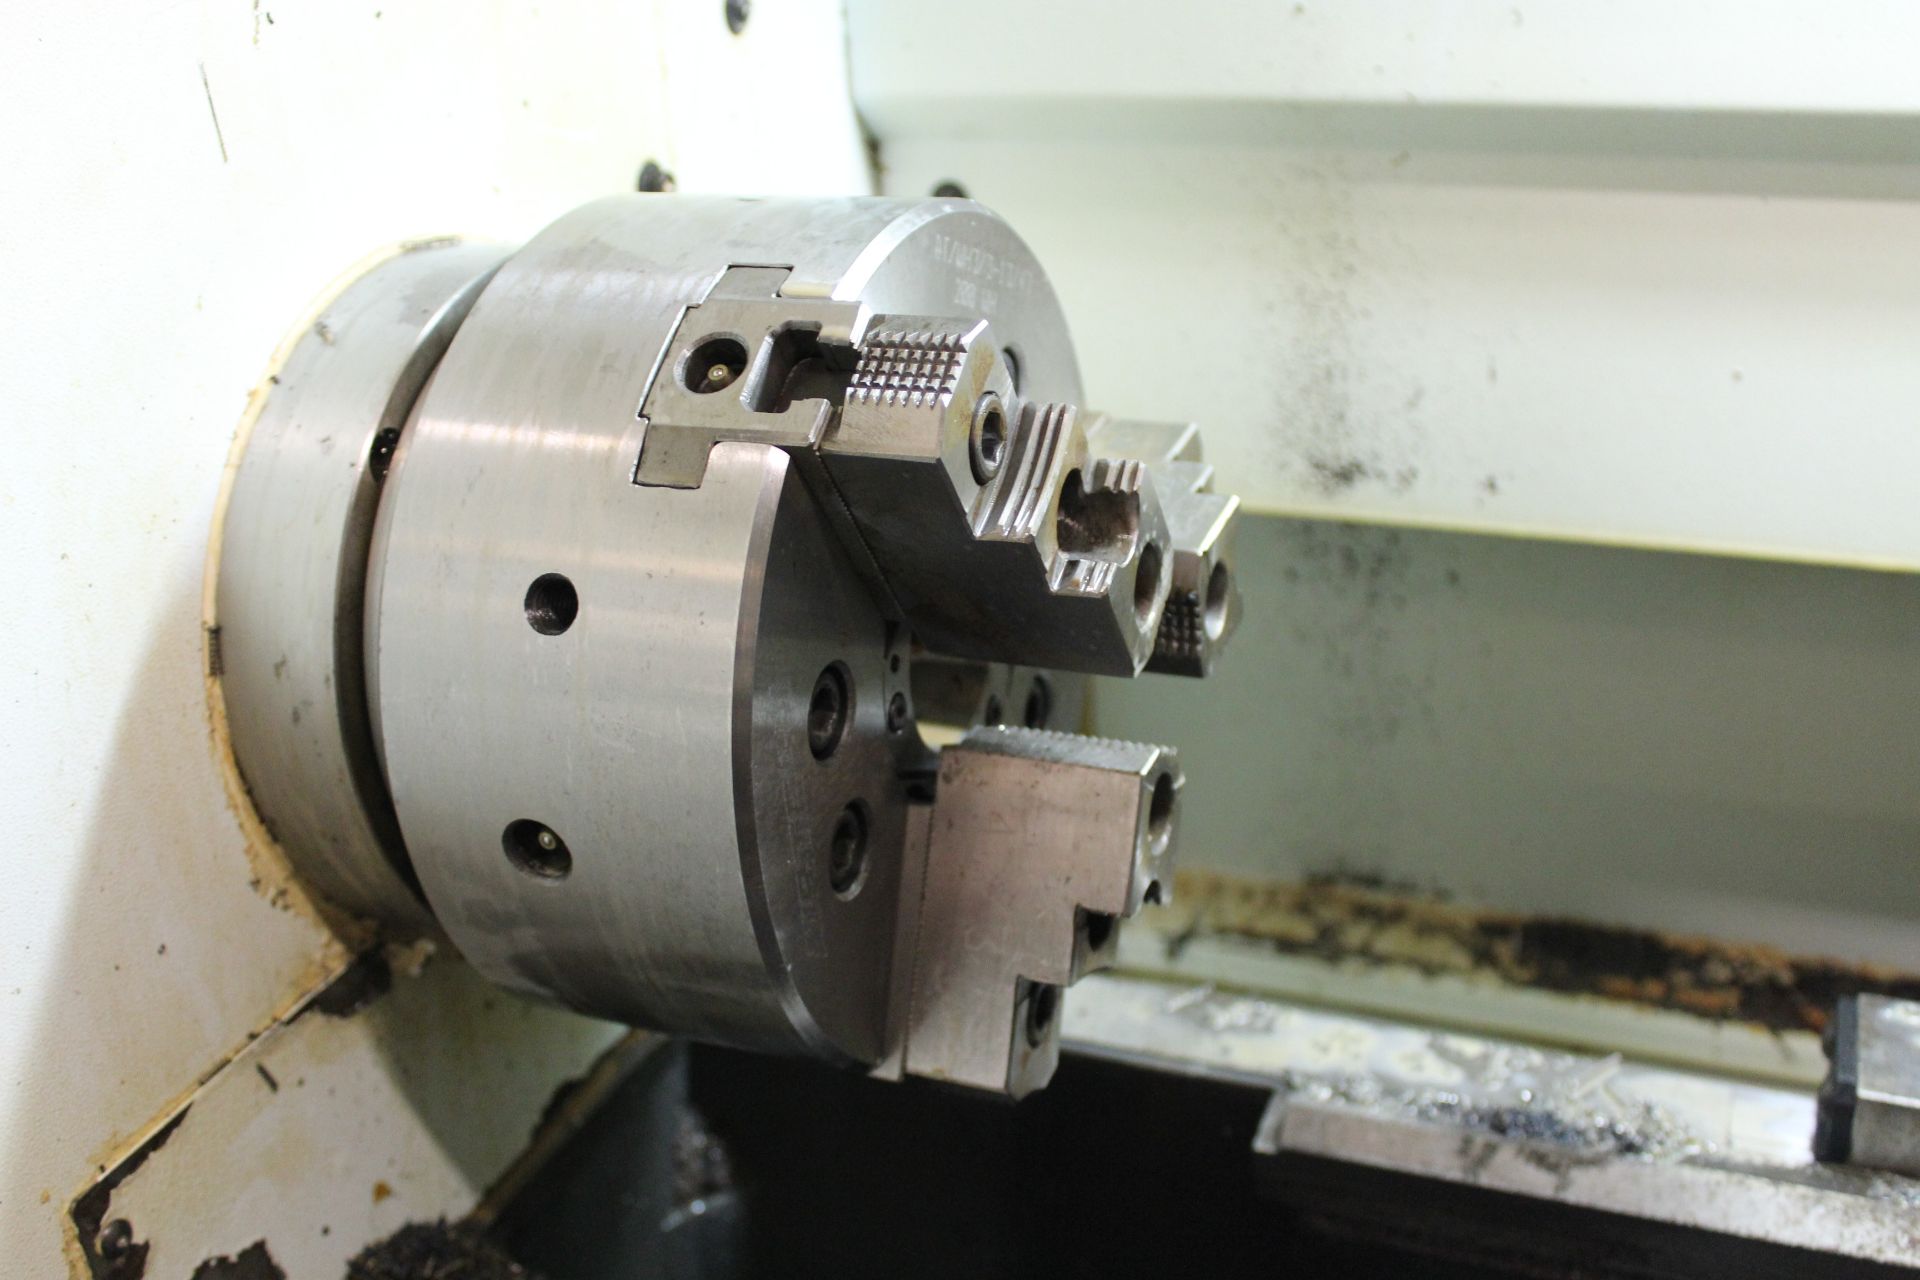 Pinacho ST180 x 750 2 axis high precision flatbed CNC lathe, Serial No. 150232 (2015), swing: 355mm, - Image 7 of 7